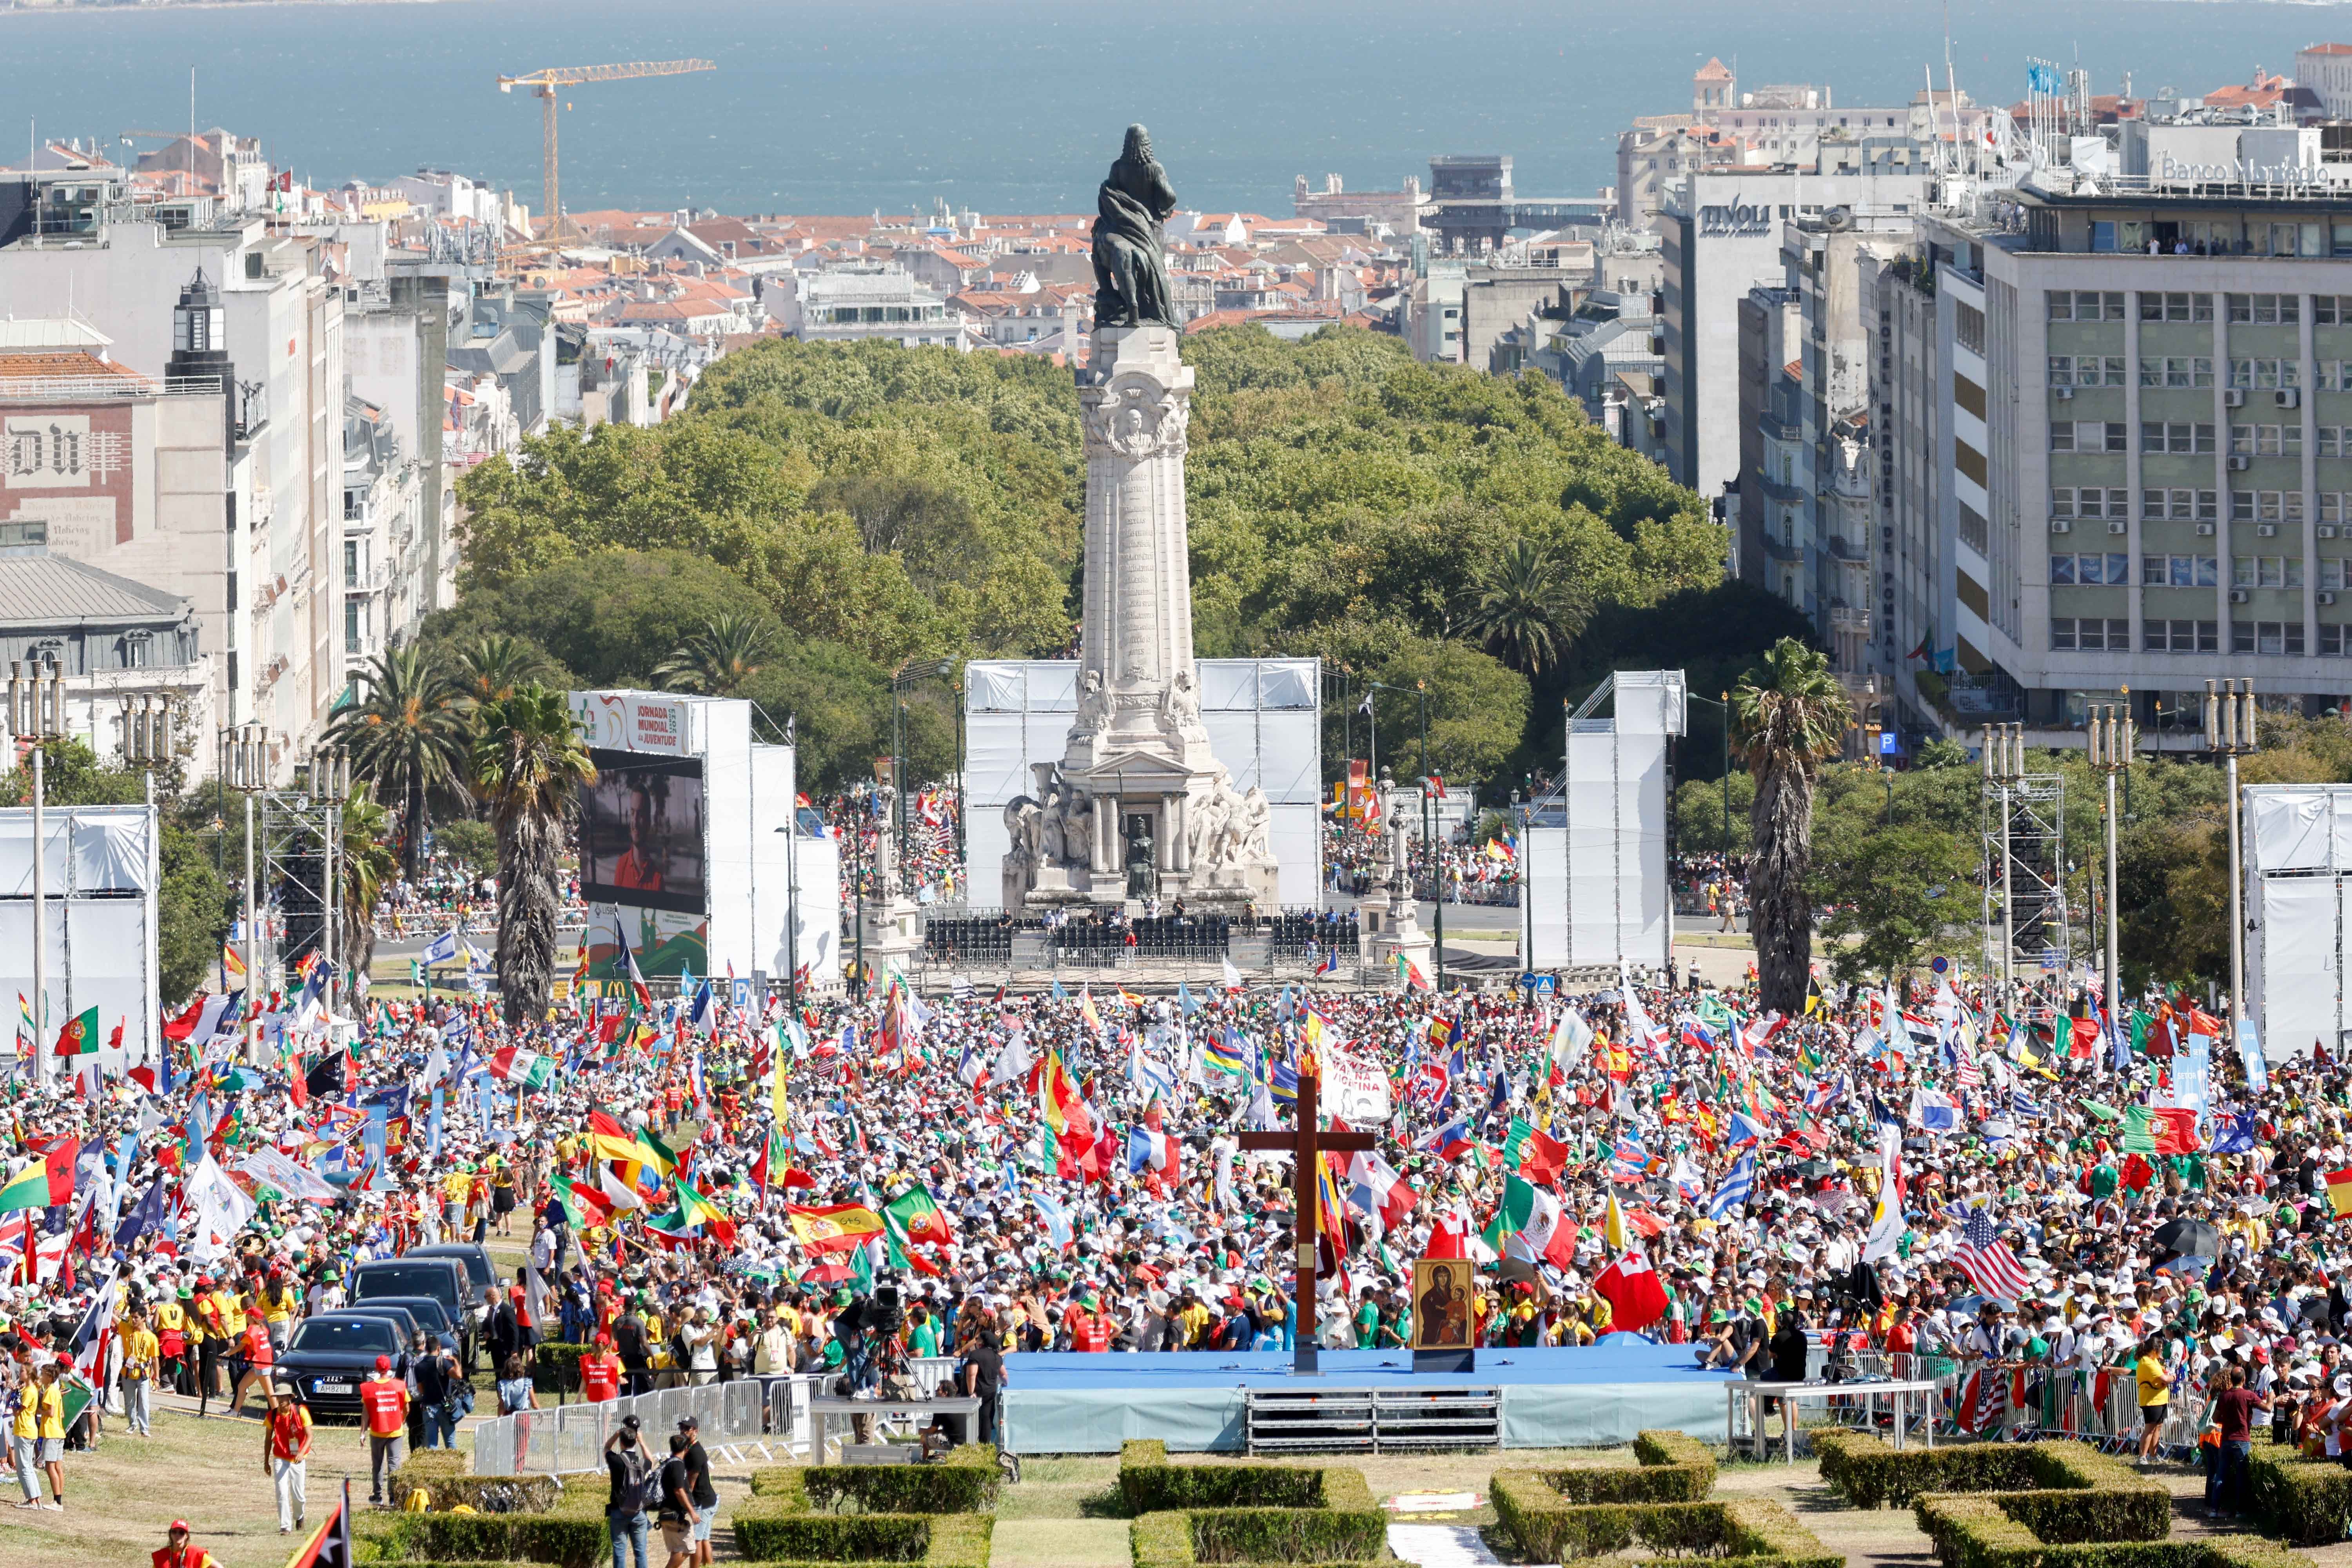 Crowd of young people at Eduardo VII Park in Lisbon, Portugal.